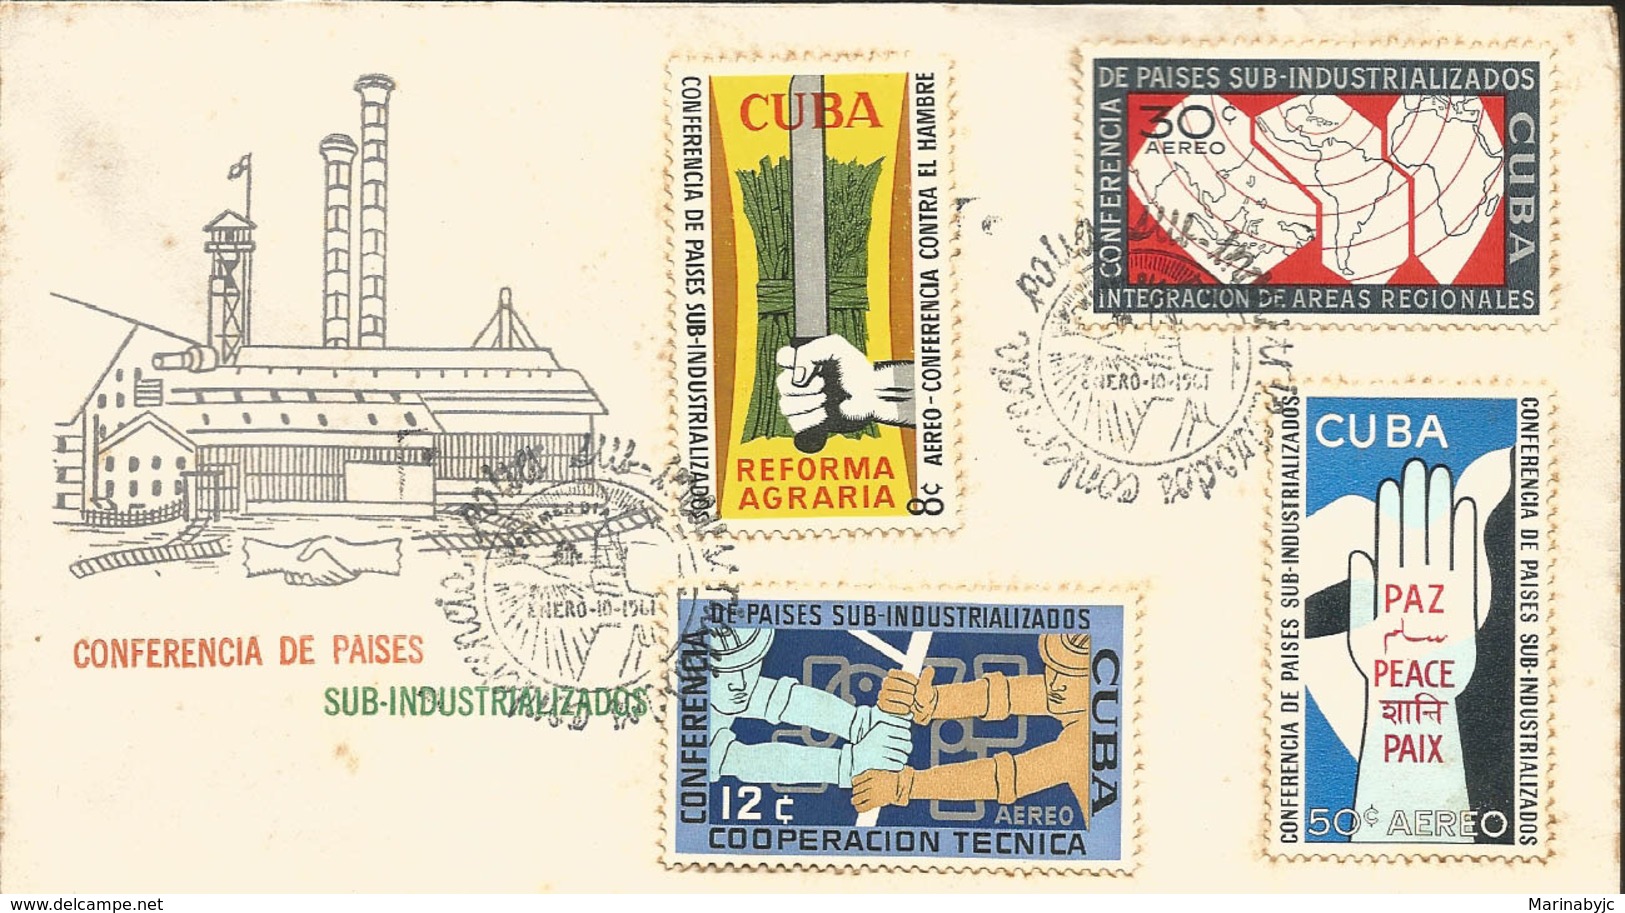 V) 1961 CARIBBEAN, PUBLIC CAPITAL FOR ECONOMIC BENEFIT, MULTIPLE STAMPS, BLACK CANCELLATION, SET OF 4, WITH SLOGAN CANCE - Storia Postale